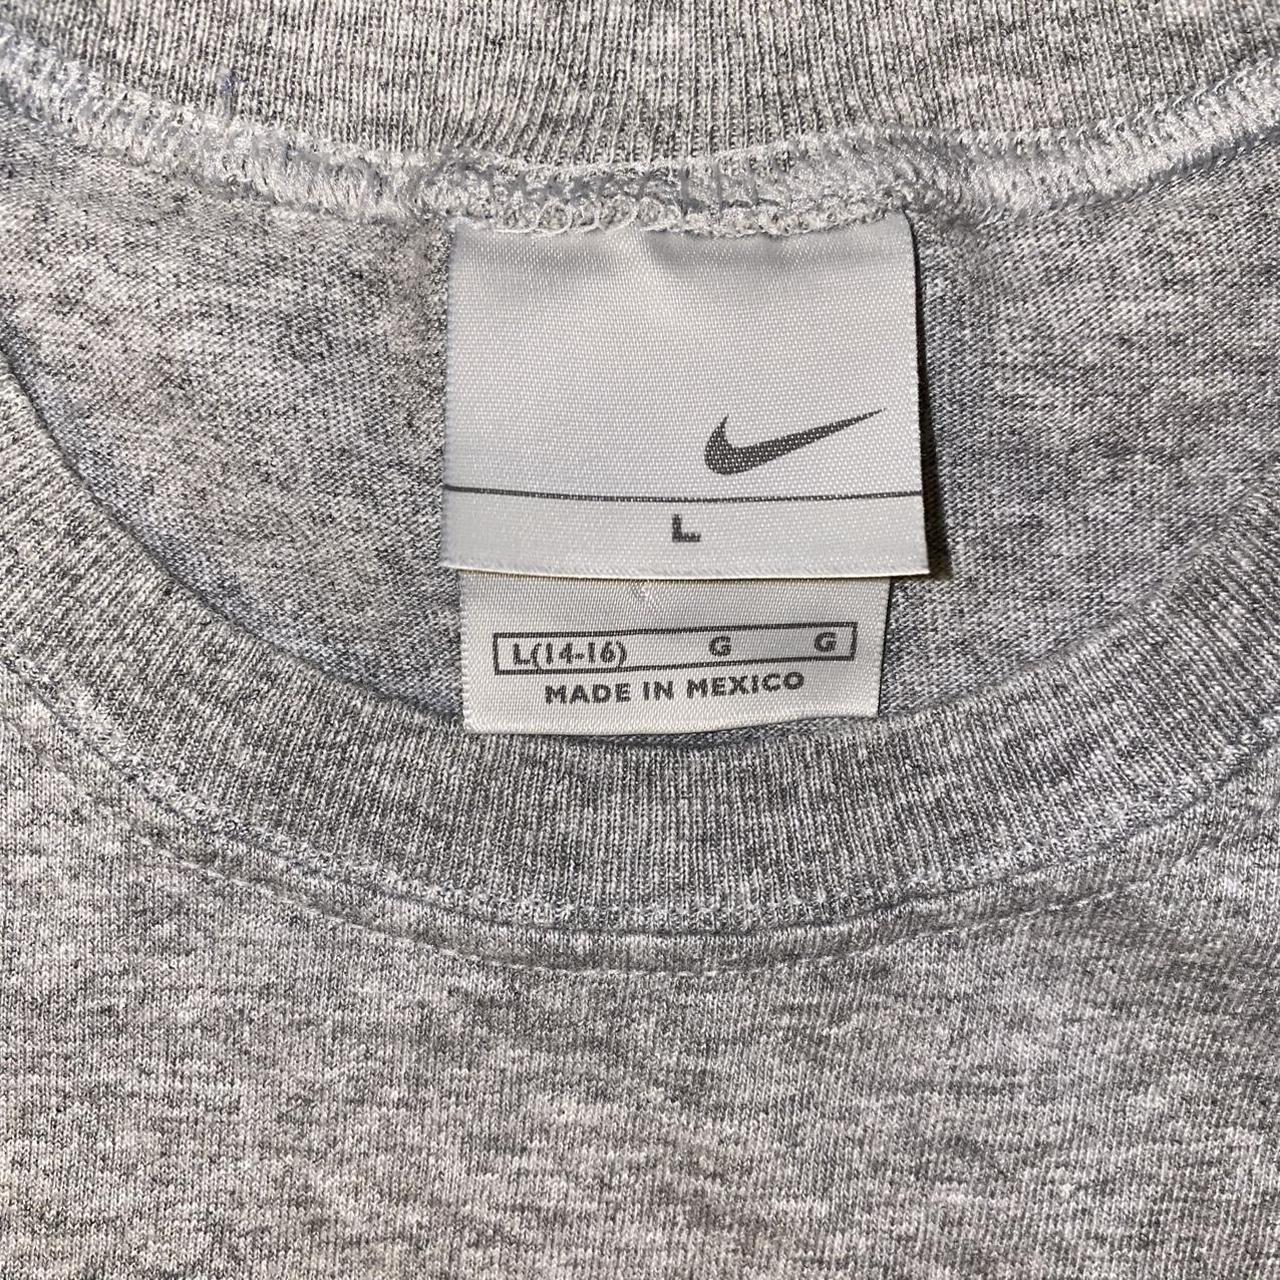 Vintage Nike Shirt. Dope grey tank top from the... - Depop